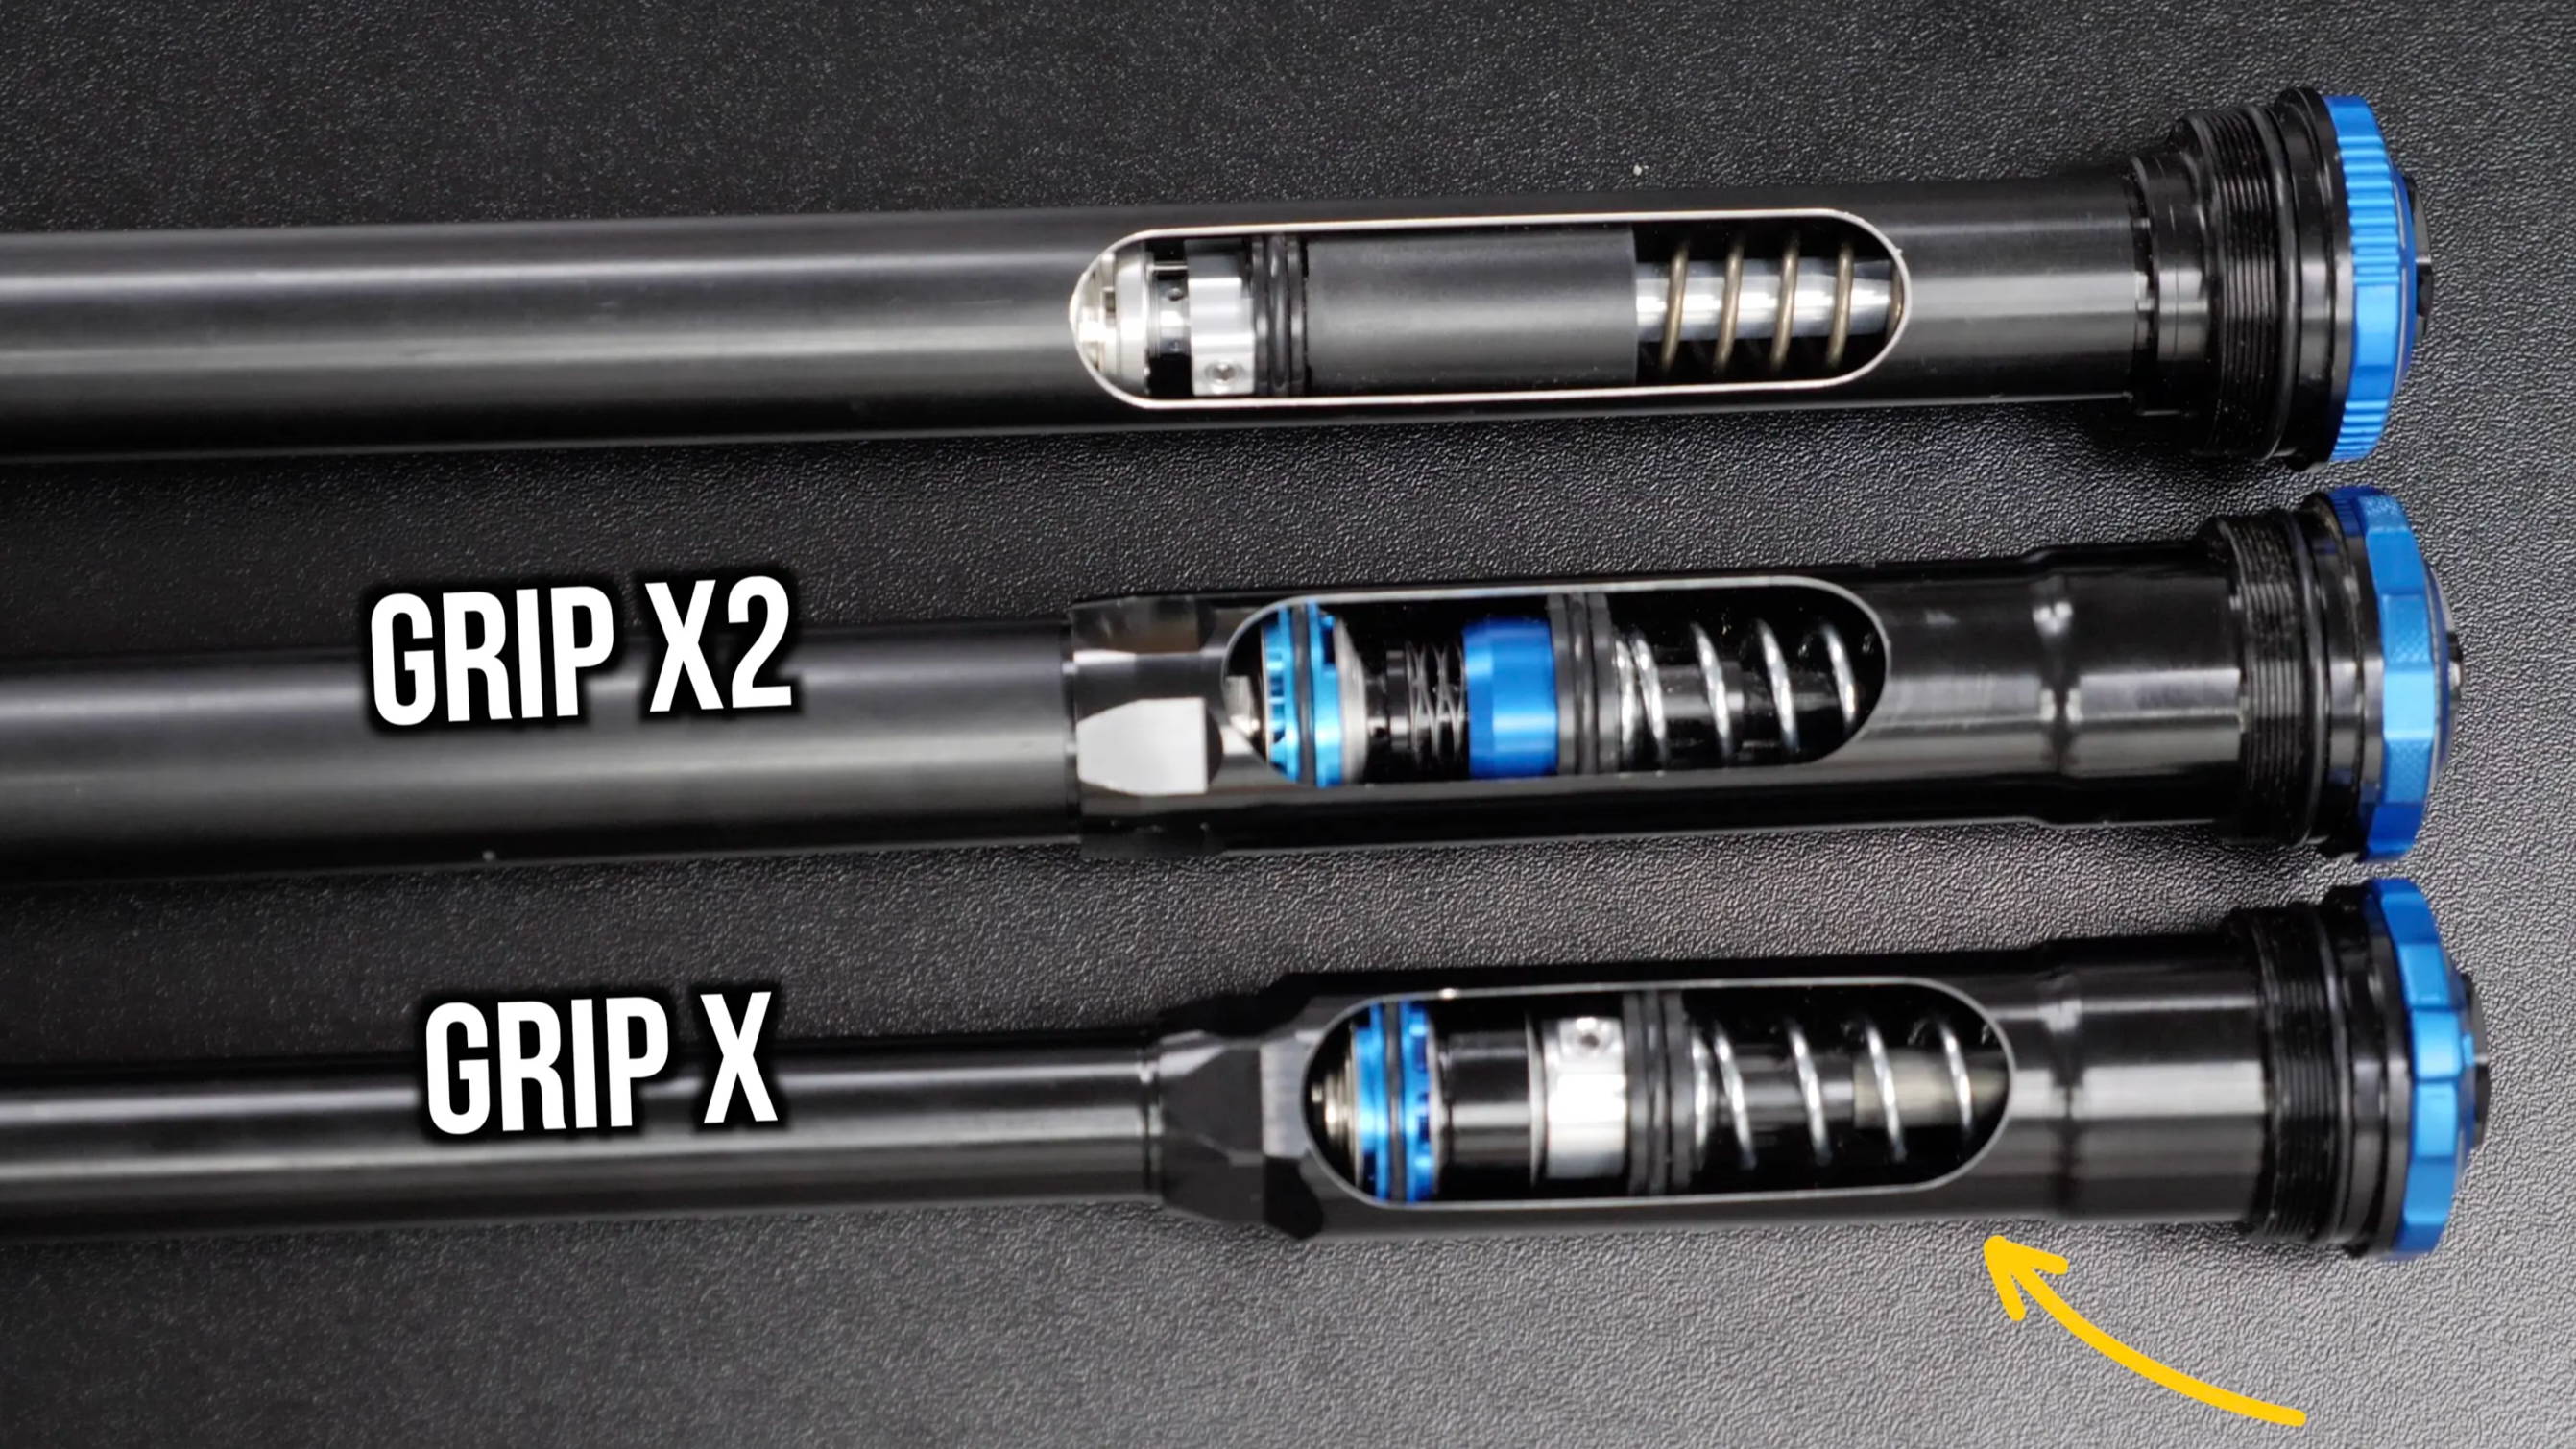 fox grip x grip x2 and grip2 dampers side by side to compare internals with cutaway images